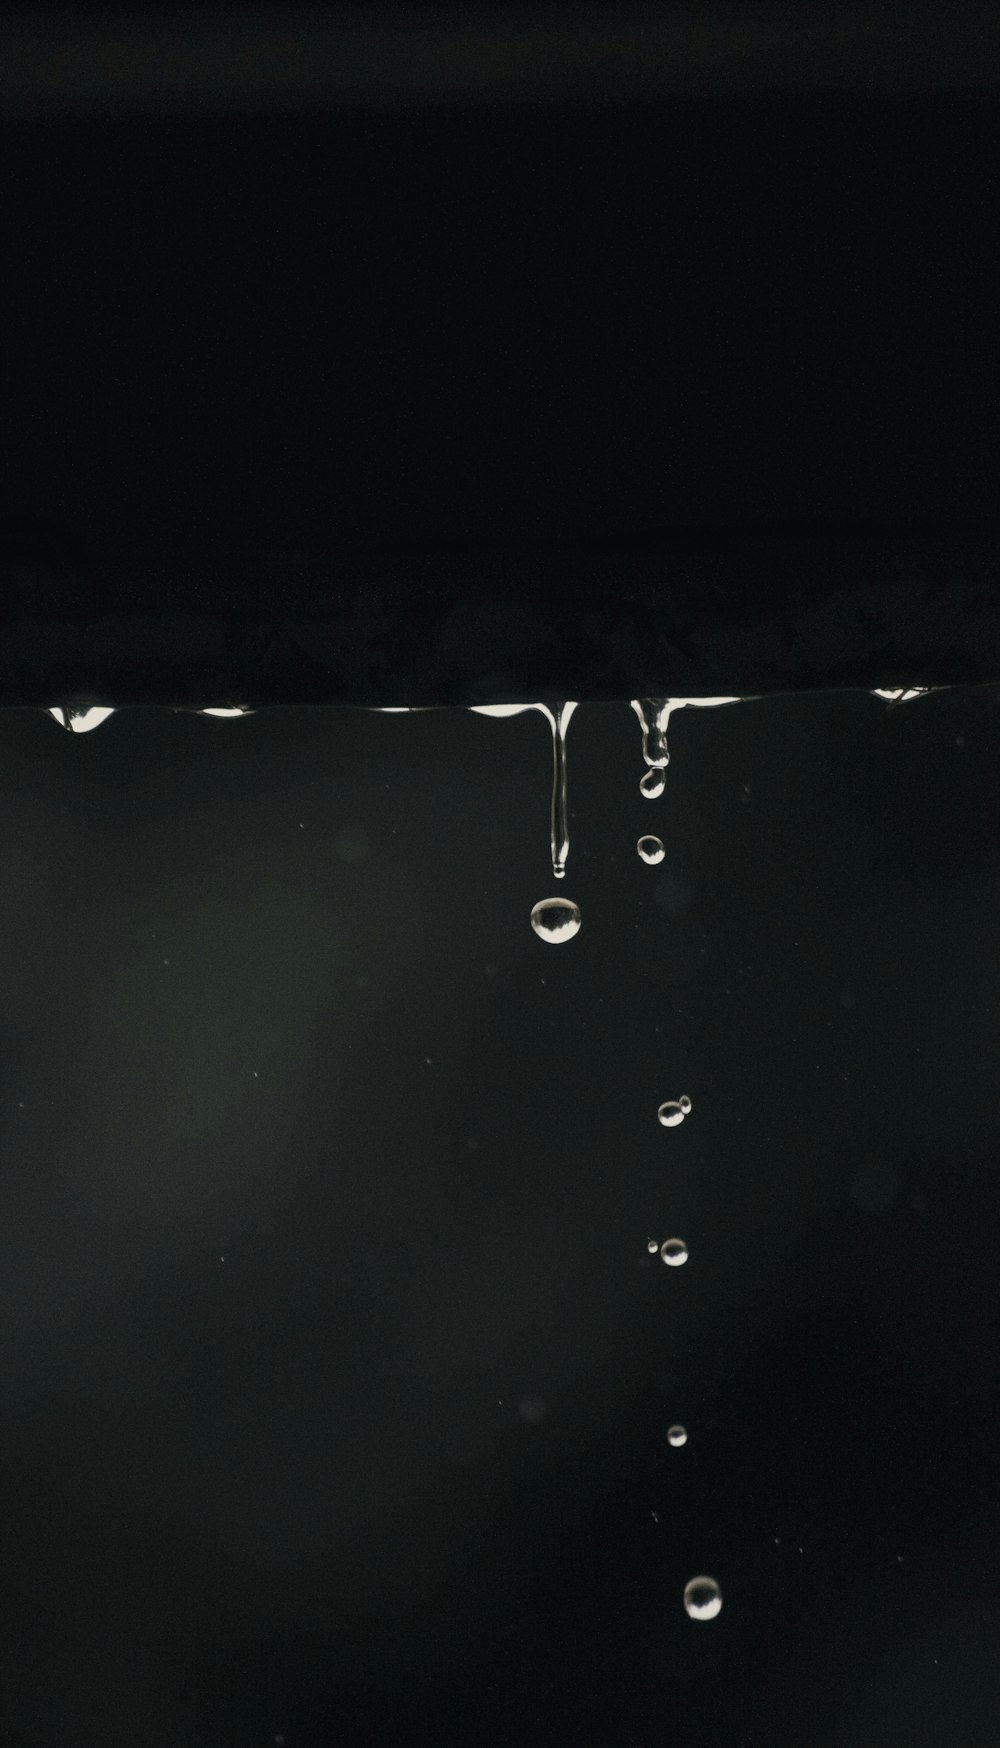 silhouette of droplets